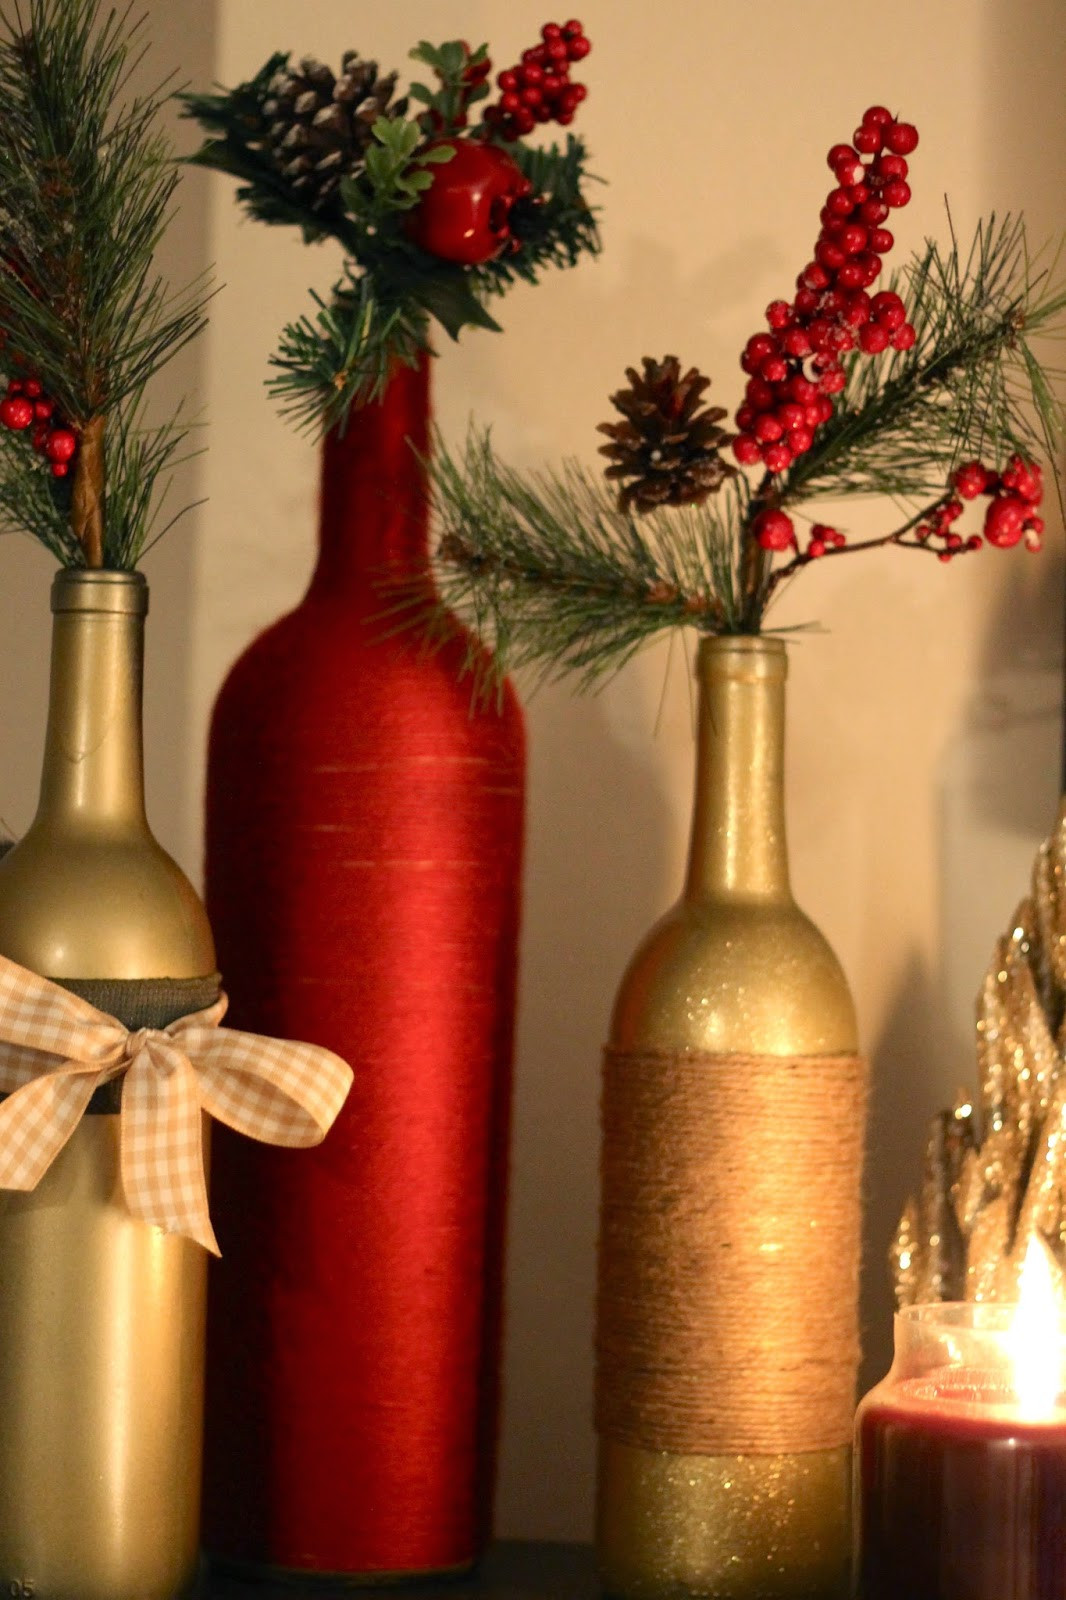 DIY Wine Bottle Decorating Ideas
 DIY Holiday Wine Bottles Pretty in the Pines North Carolina Lifestyle and Fashion Blog